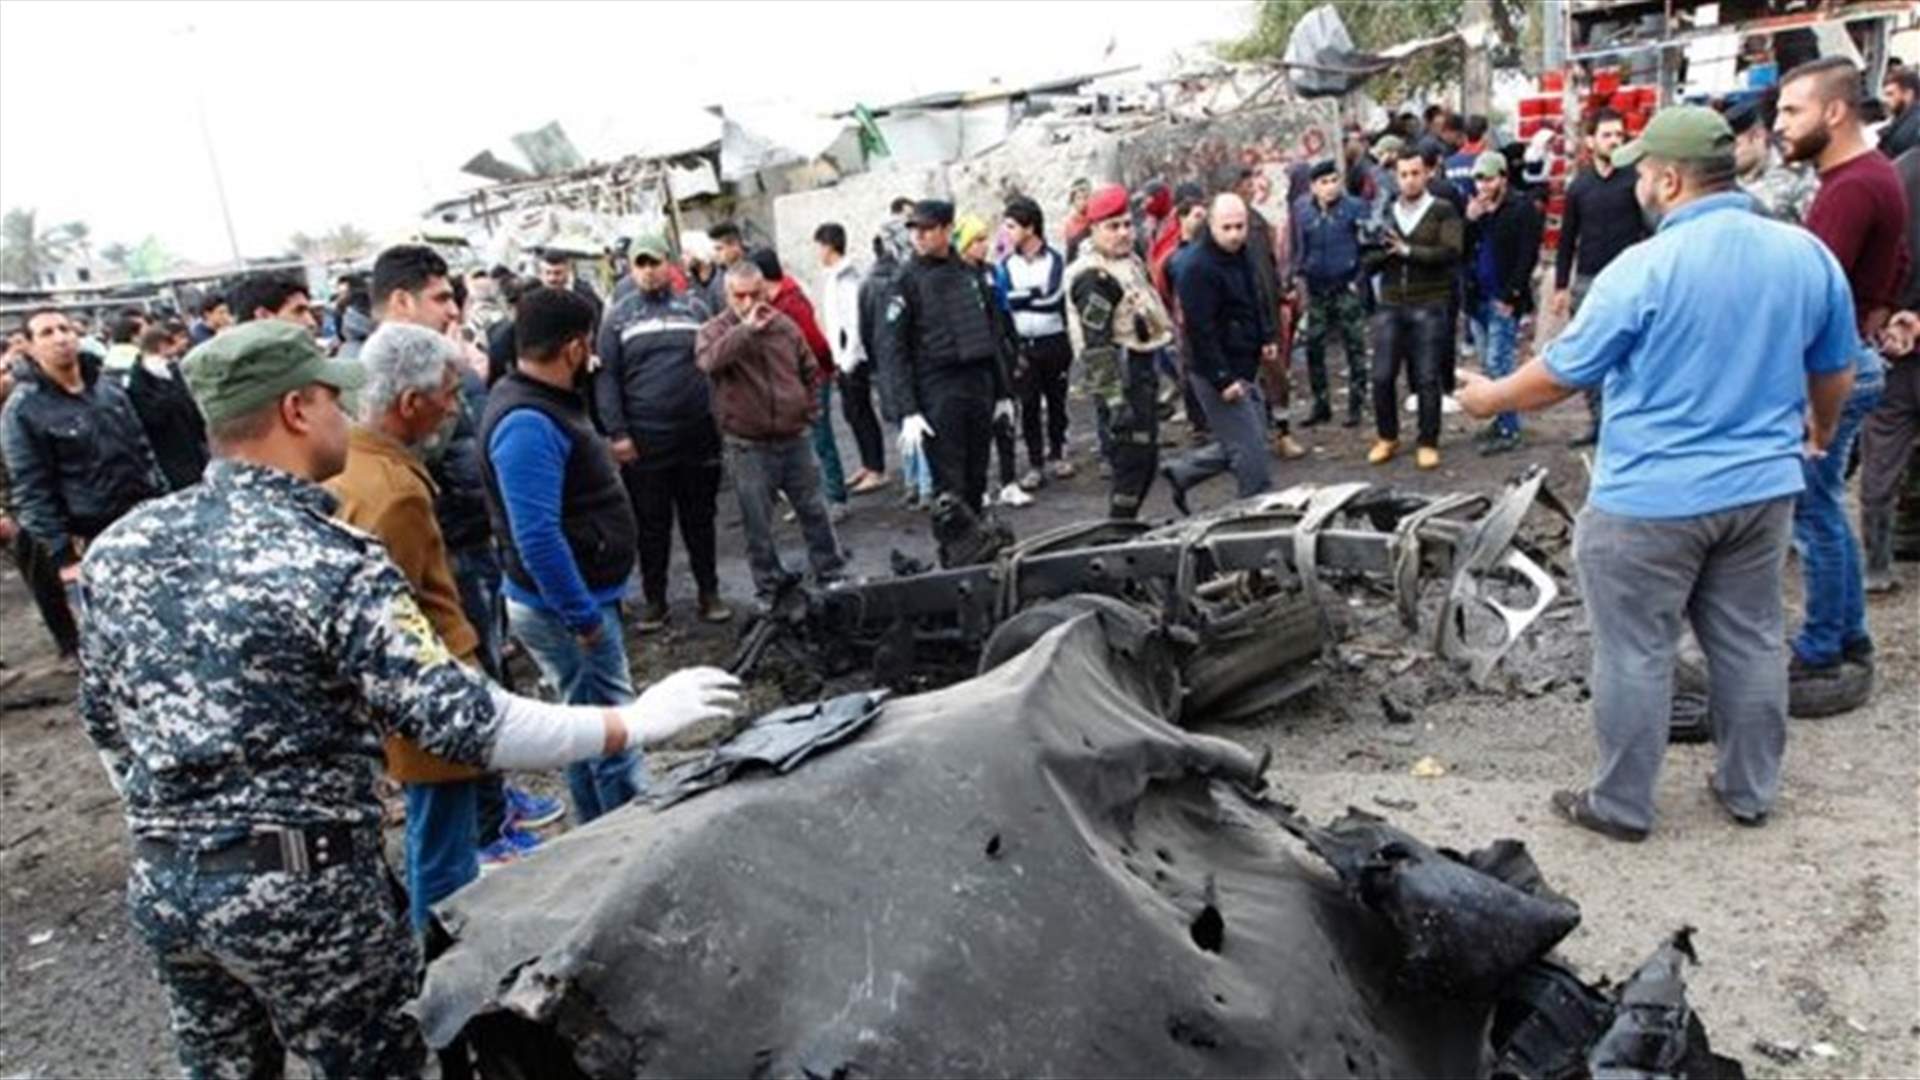 Car bomb blast kills at least 23 in south Baghdad - police and medical sources